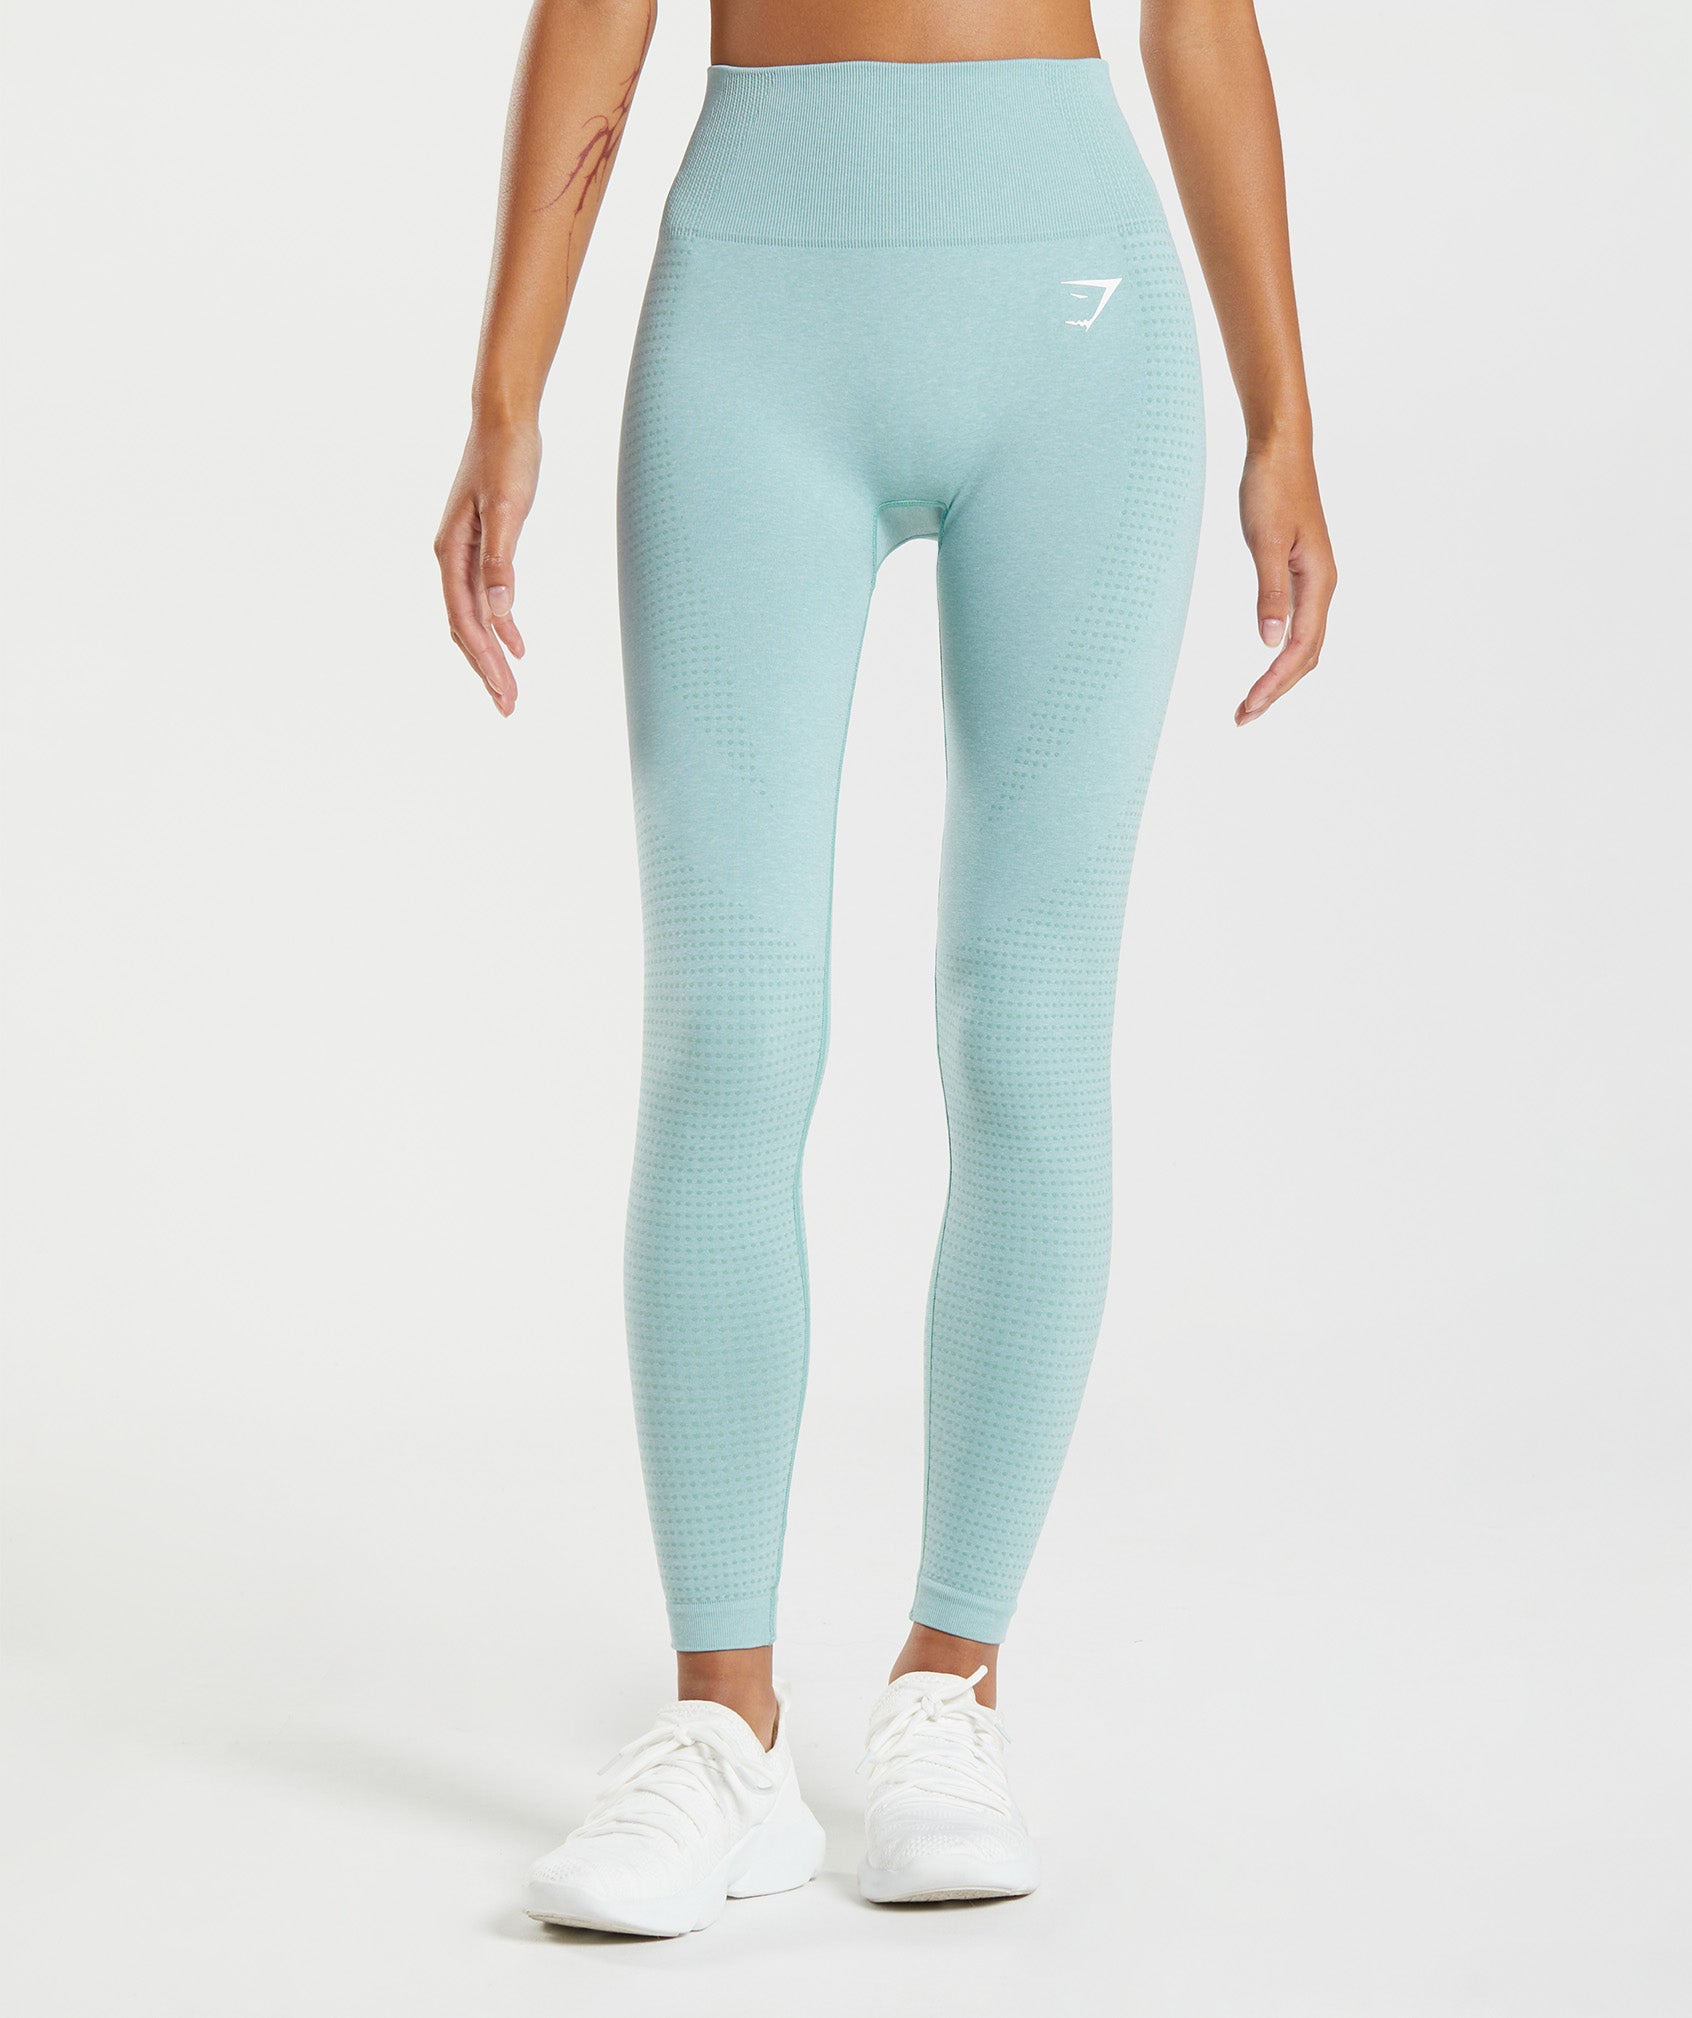 Gymshark VITAL SEAMLESS 2.0 LEGGINGS in Charcoal Marl Gray - $29 (56% Off  Retail) - From Melissa